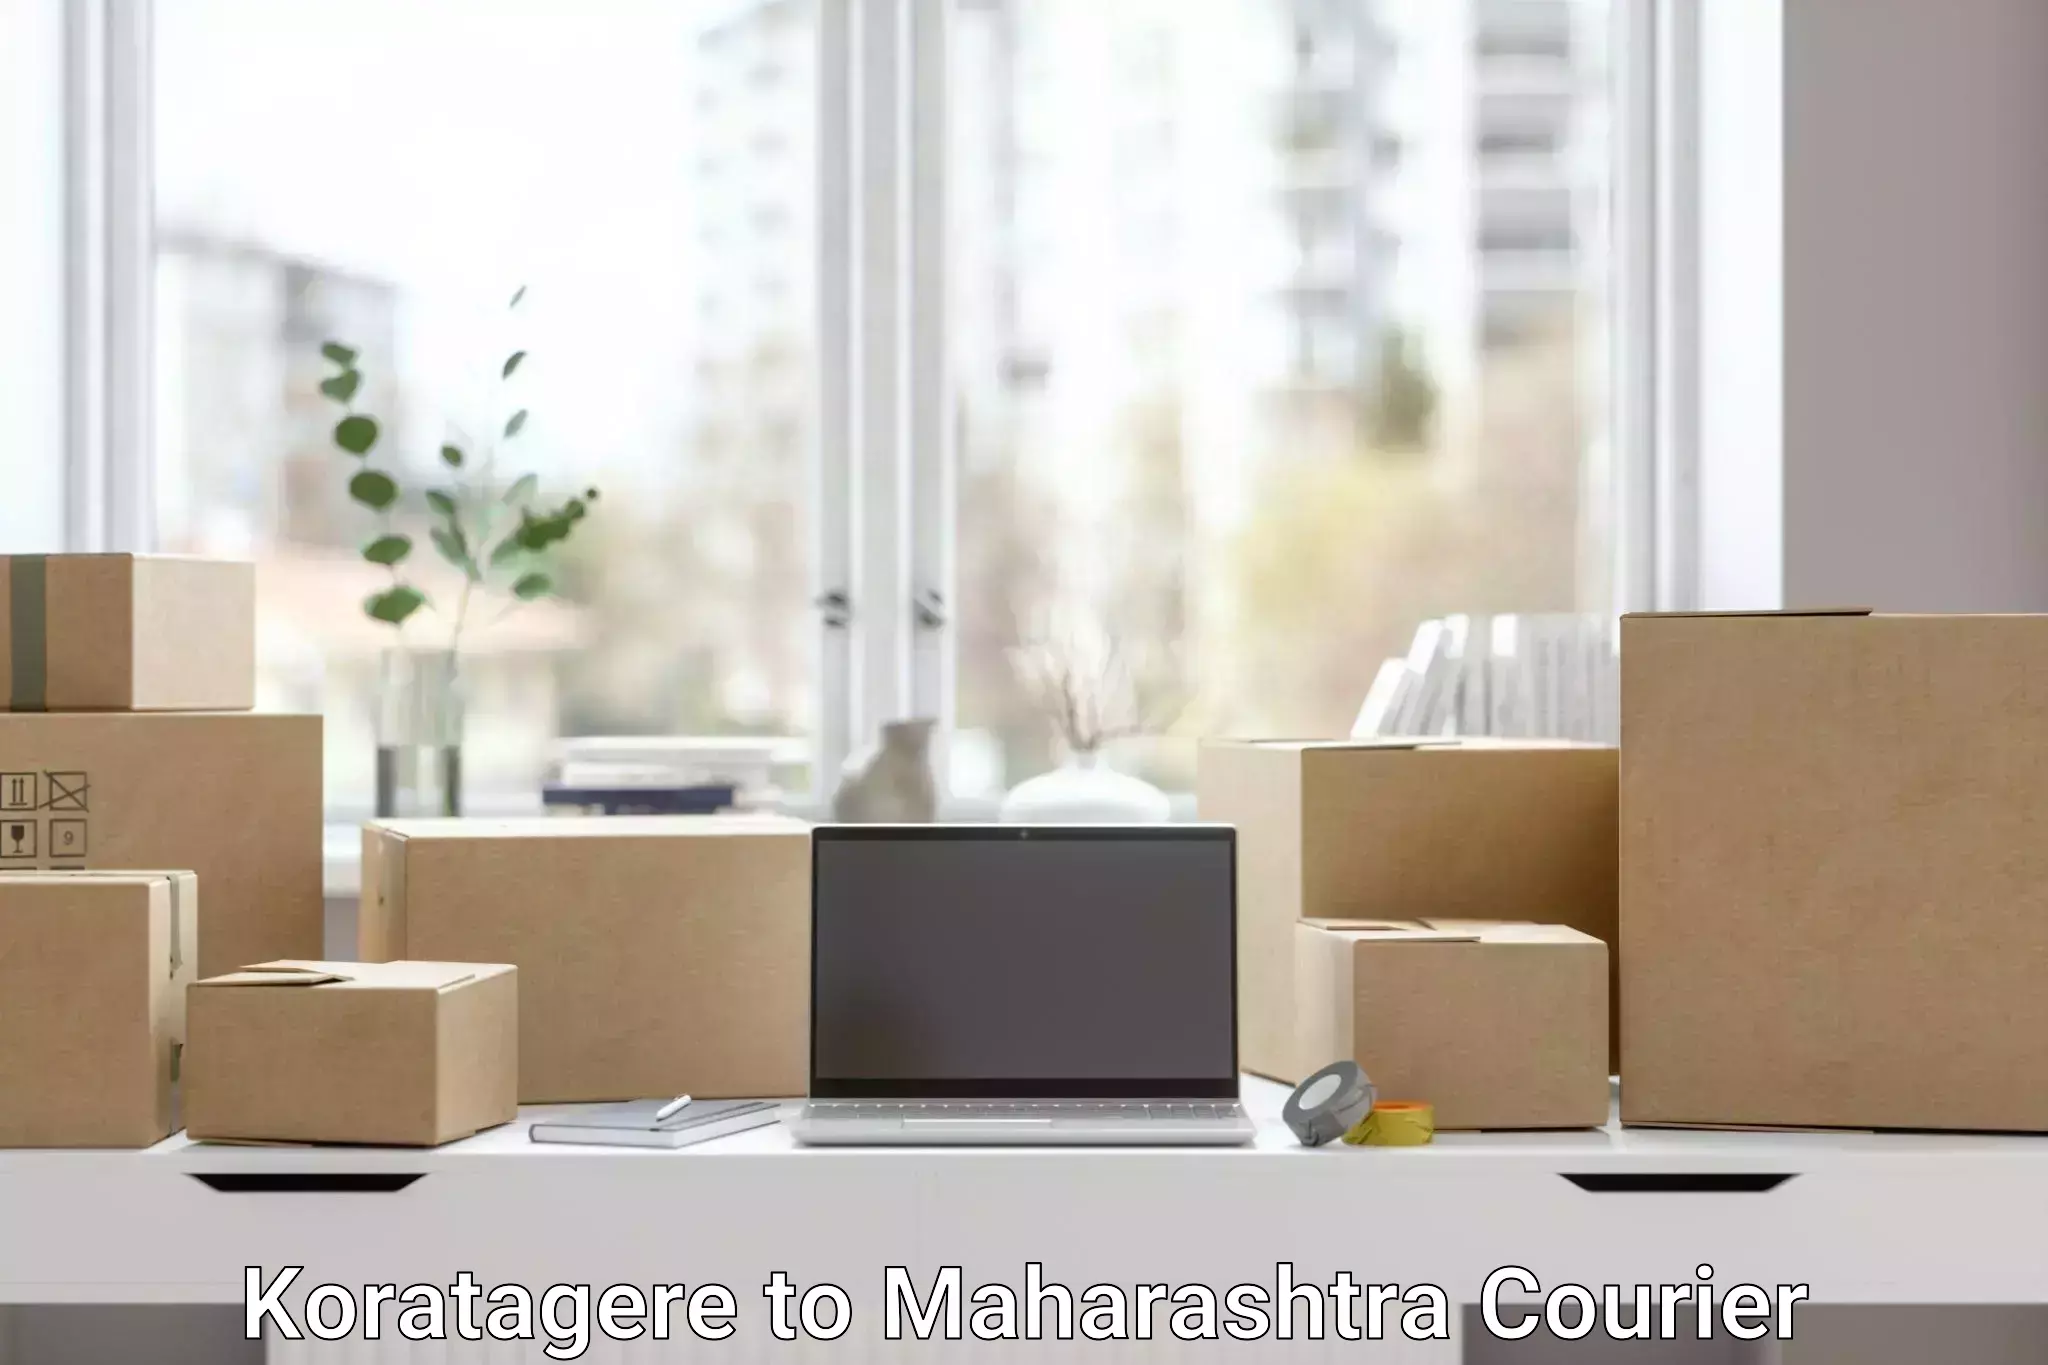 Subscription-based courier Koratagere to Worli